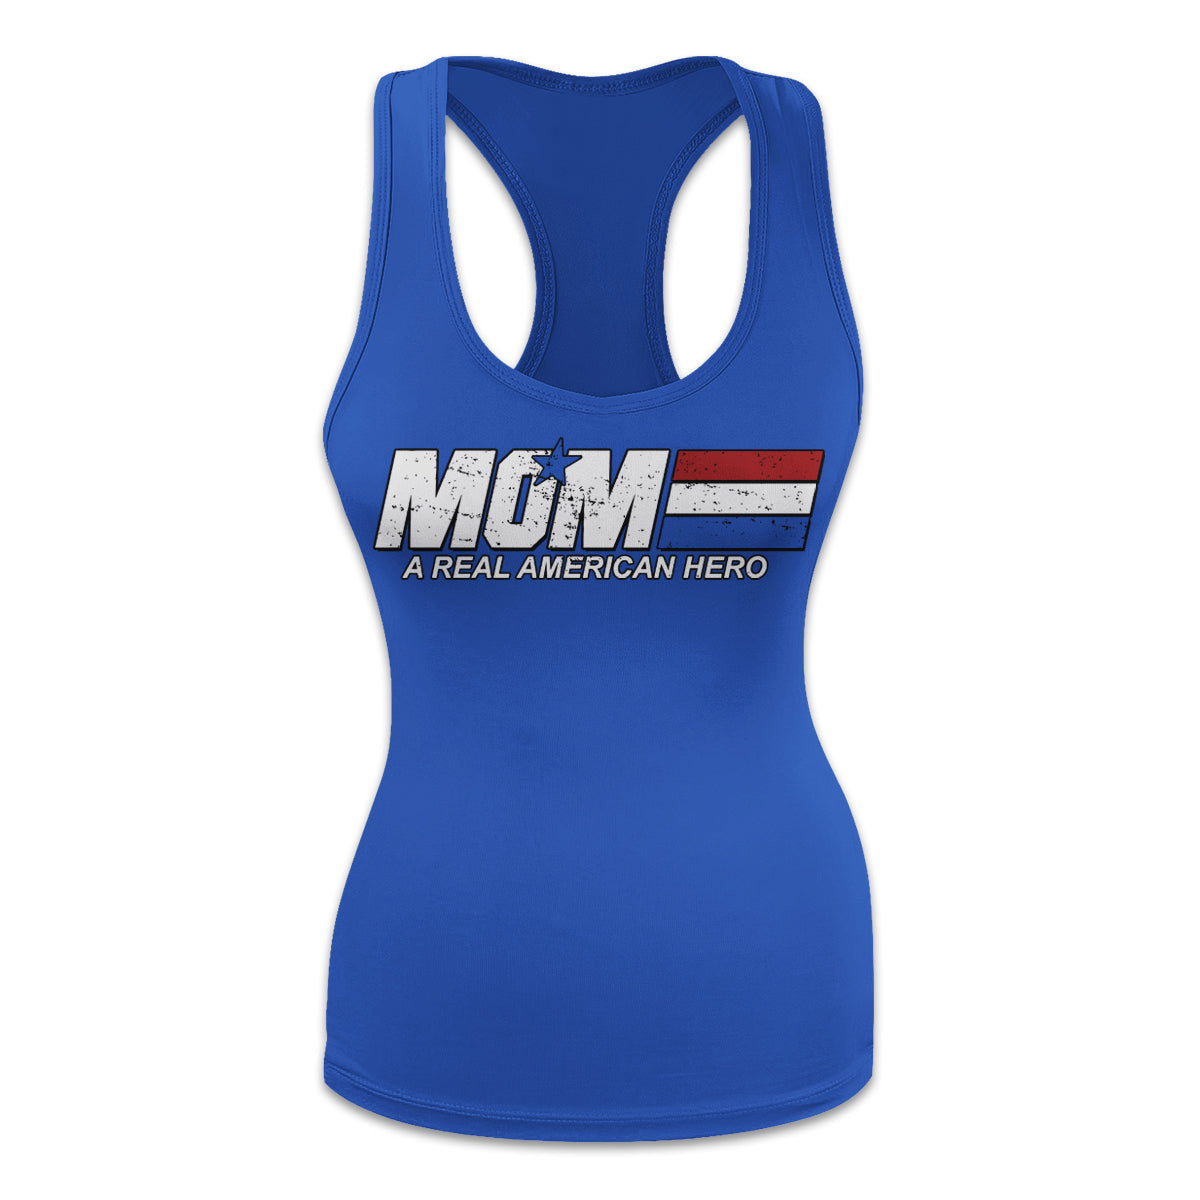 A blue women's tank top with the words "Mom: A Real American Hero" printed on the front.